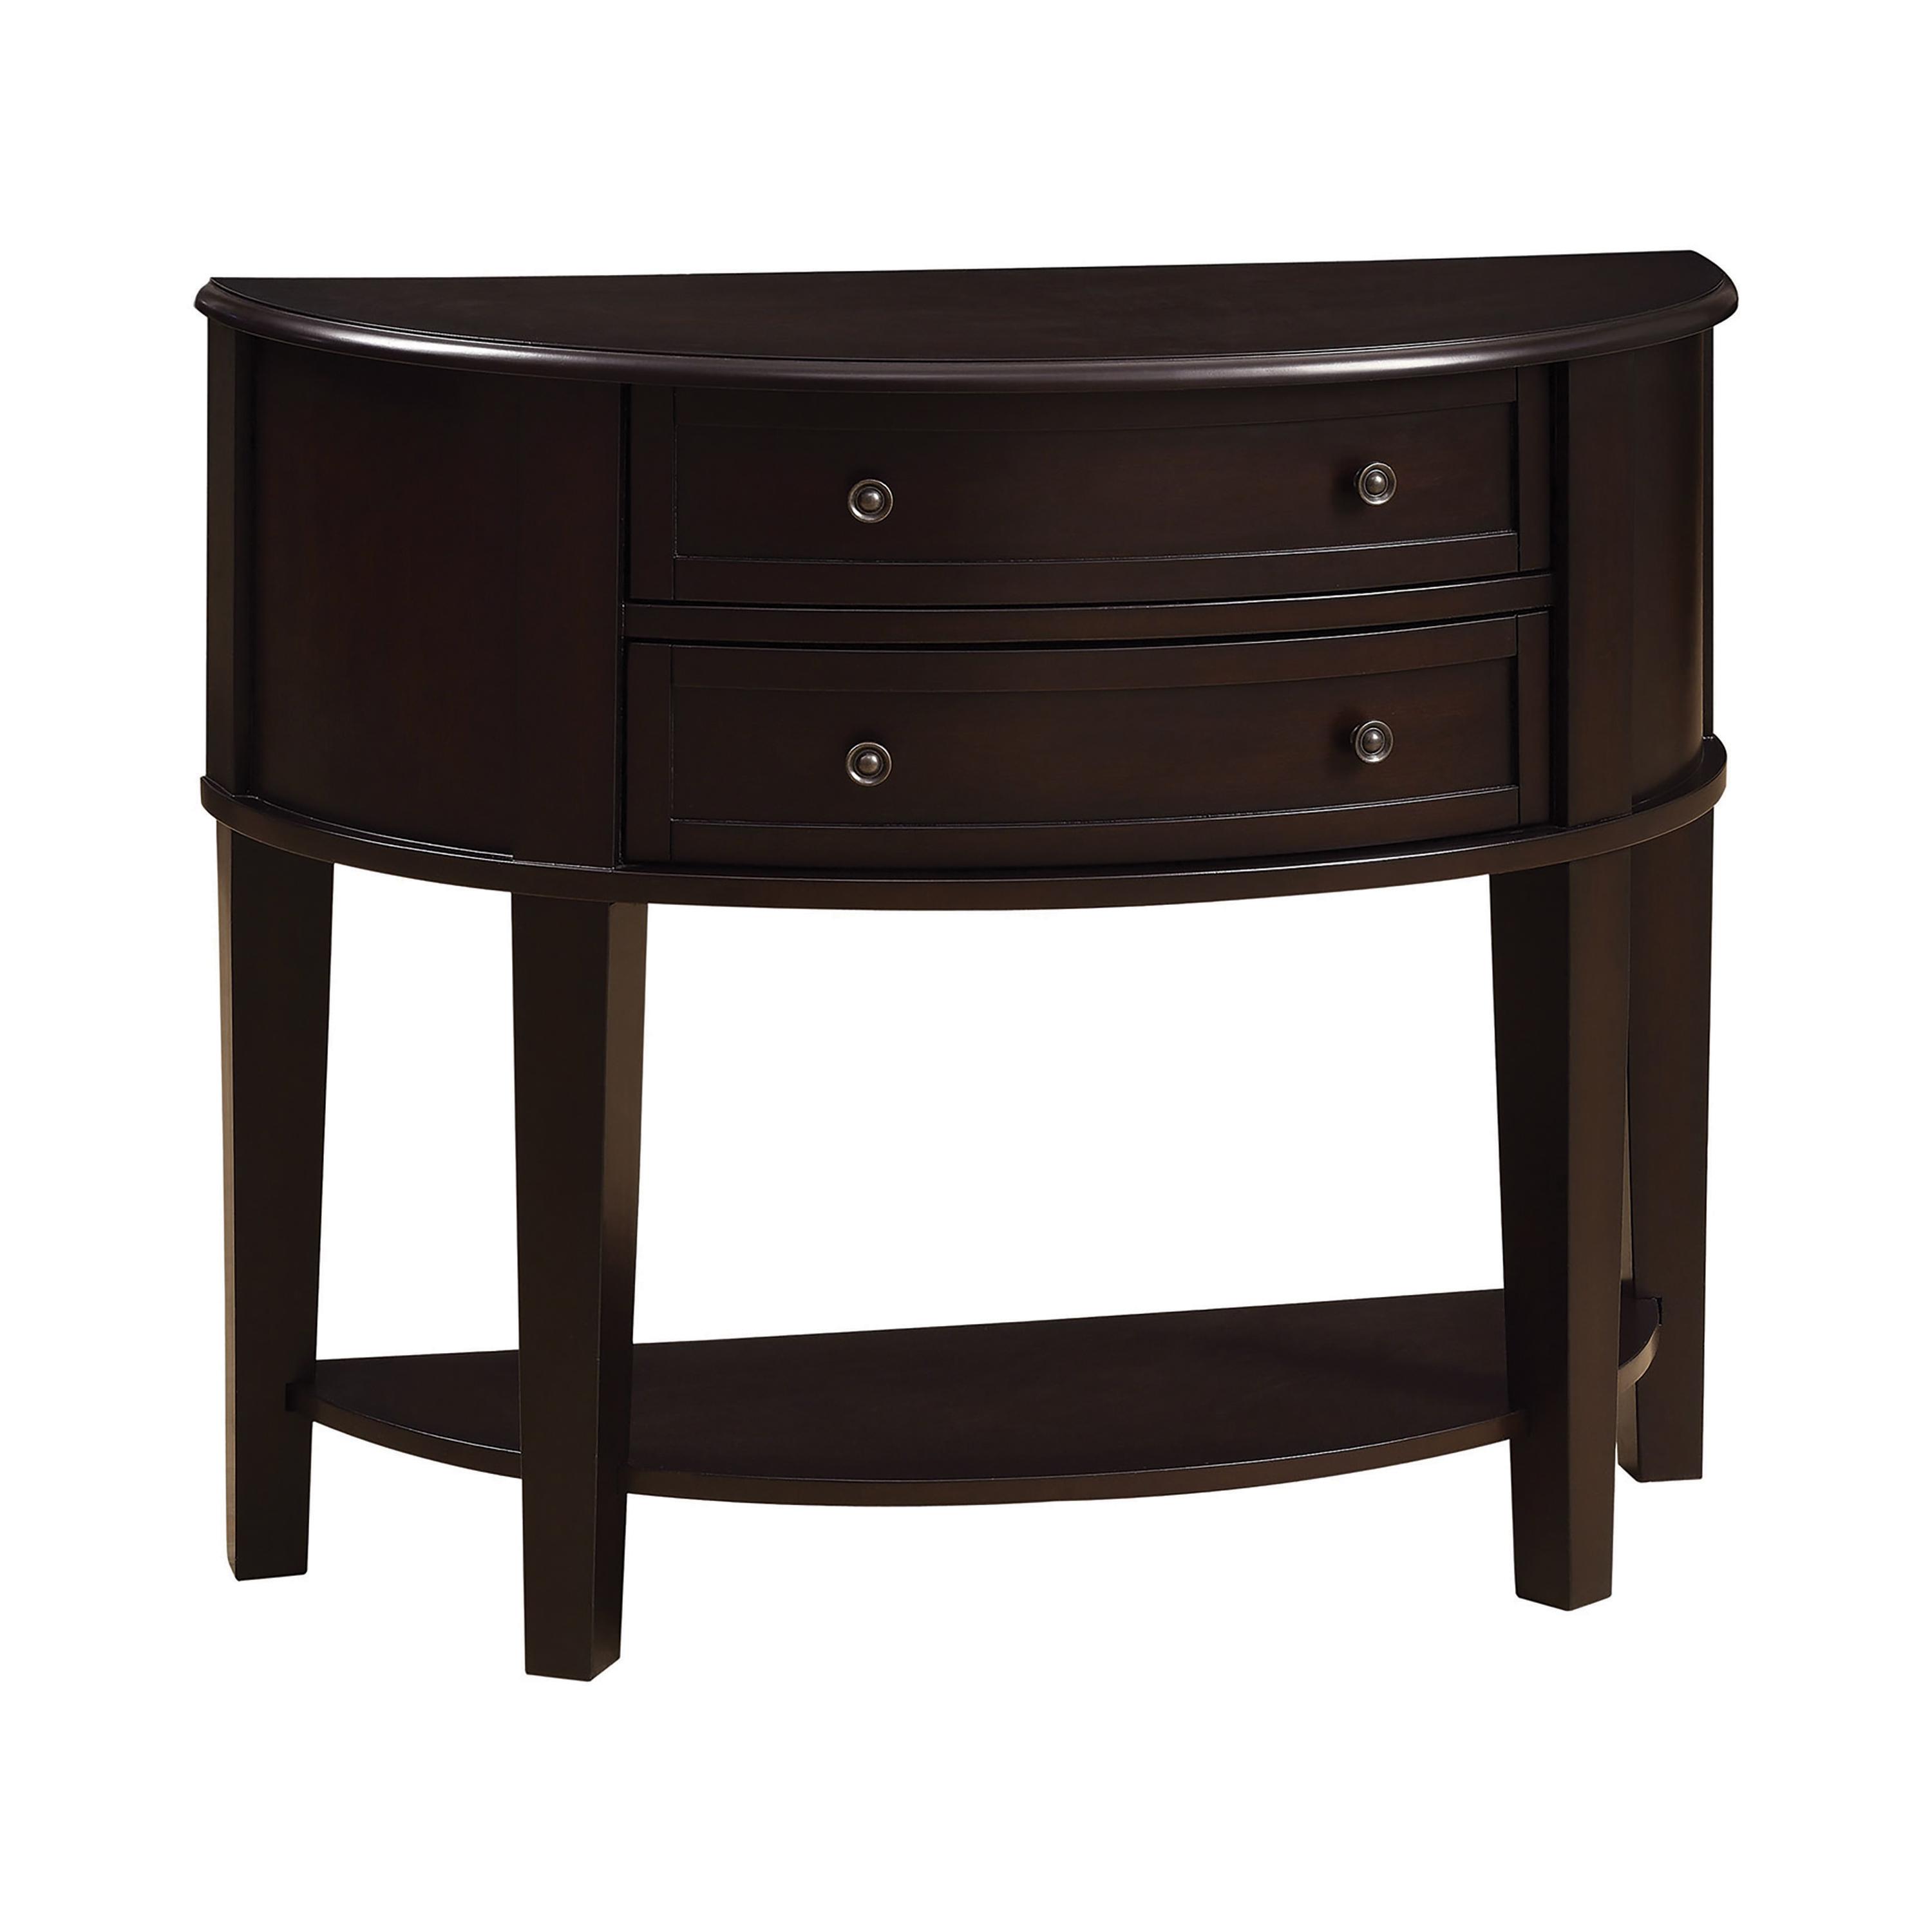 Transitional Console Table 950156 950156 in Cappuccino 